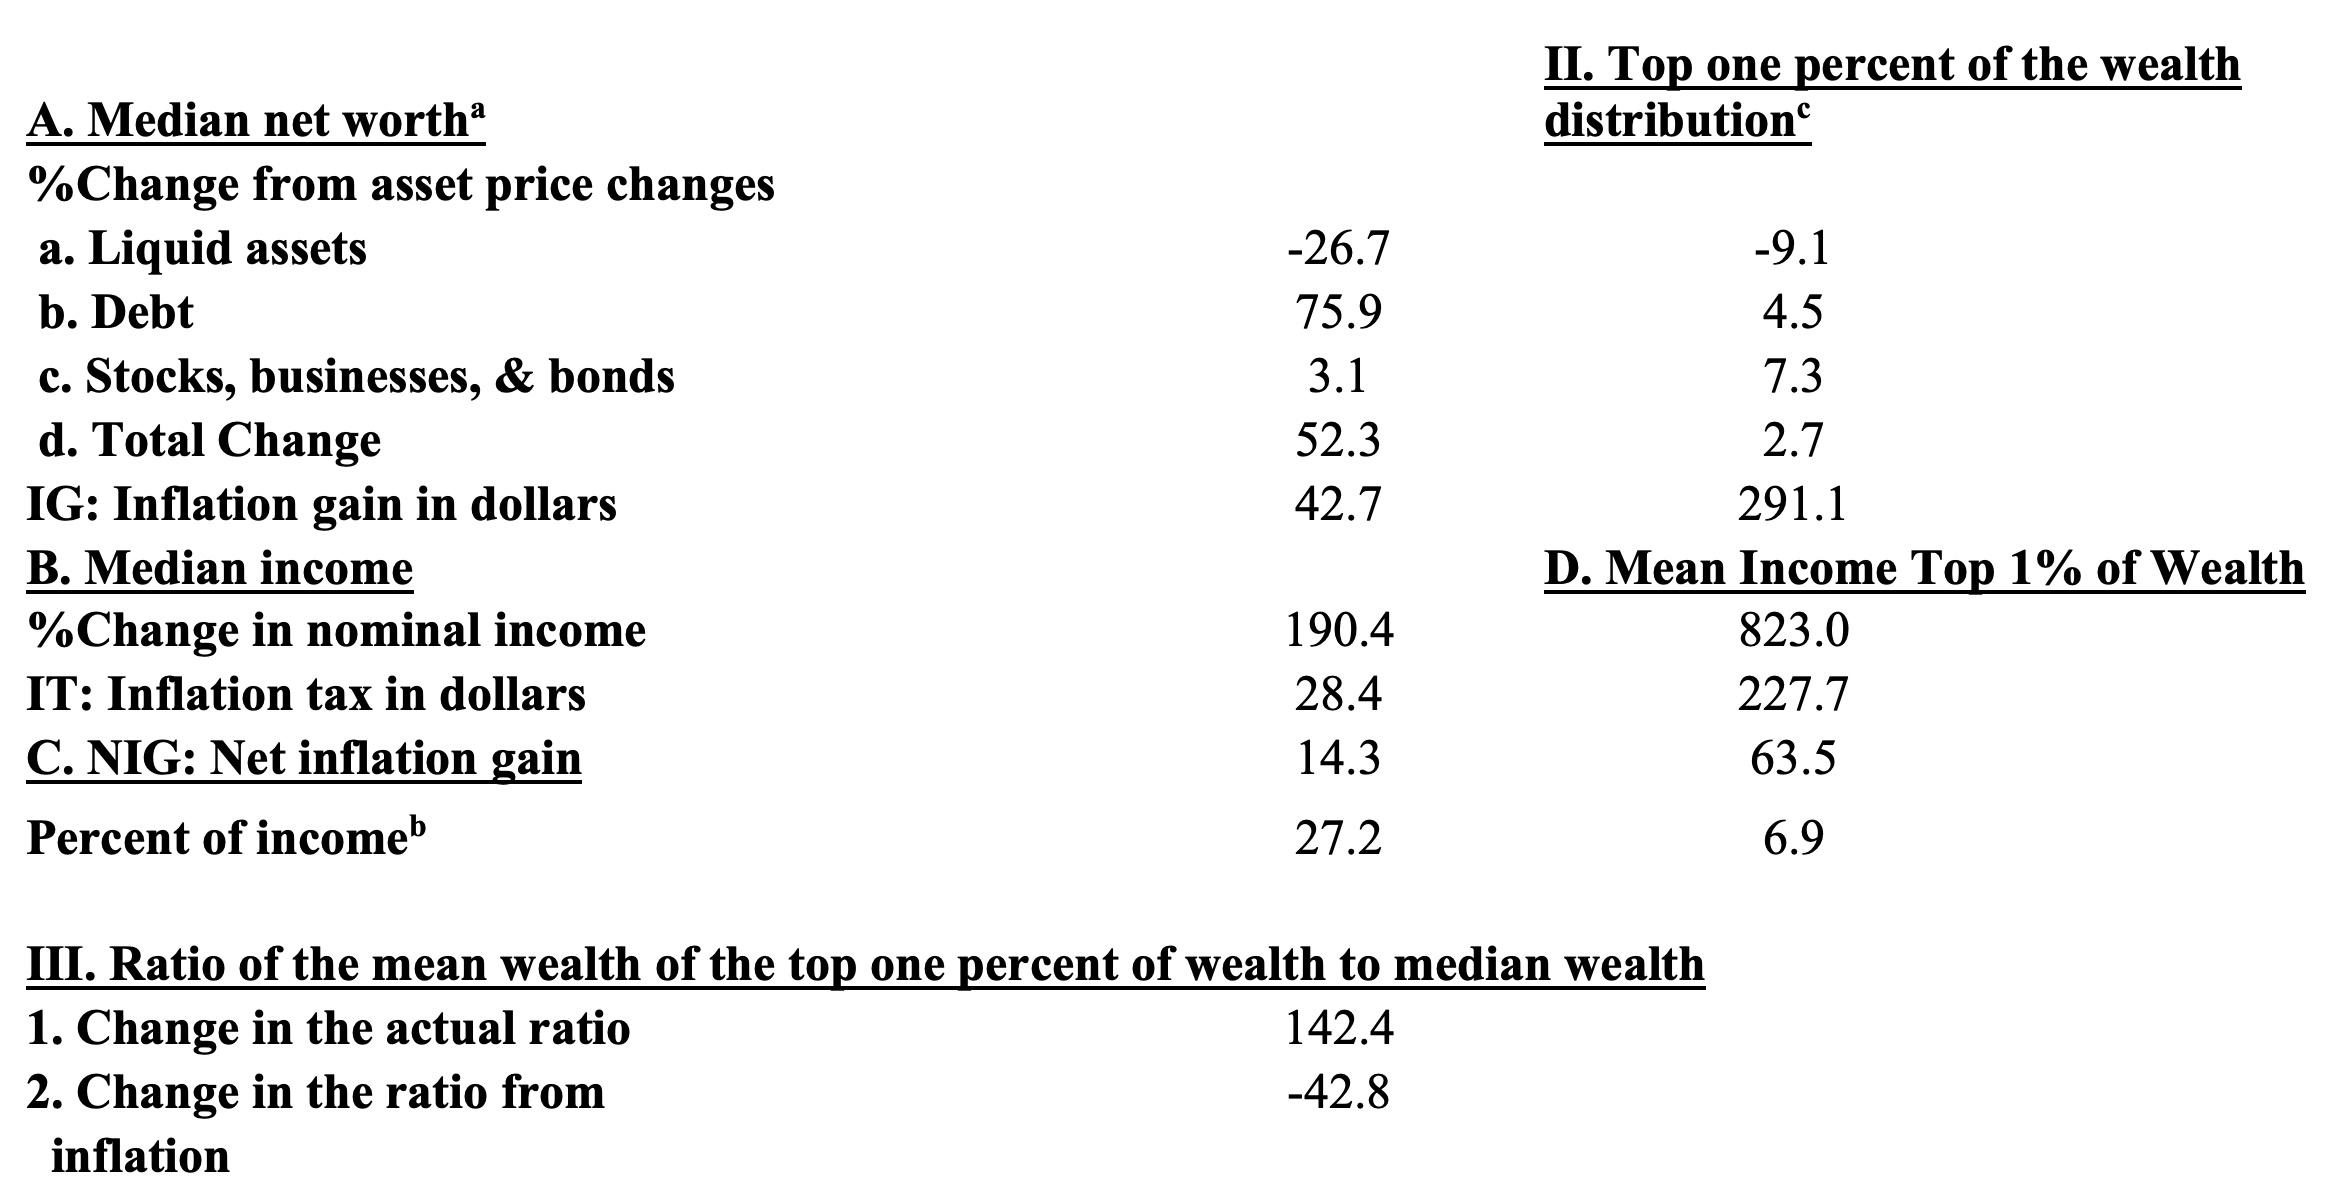 Table 3 The inflation tax on median net worth and the mean net worth of the top 1% of the wealth distribution, 1983-2019